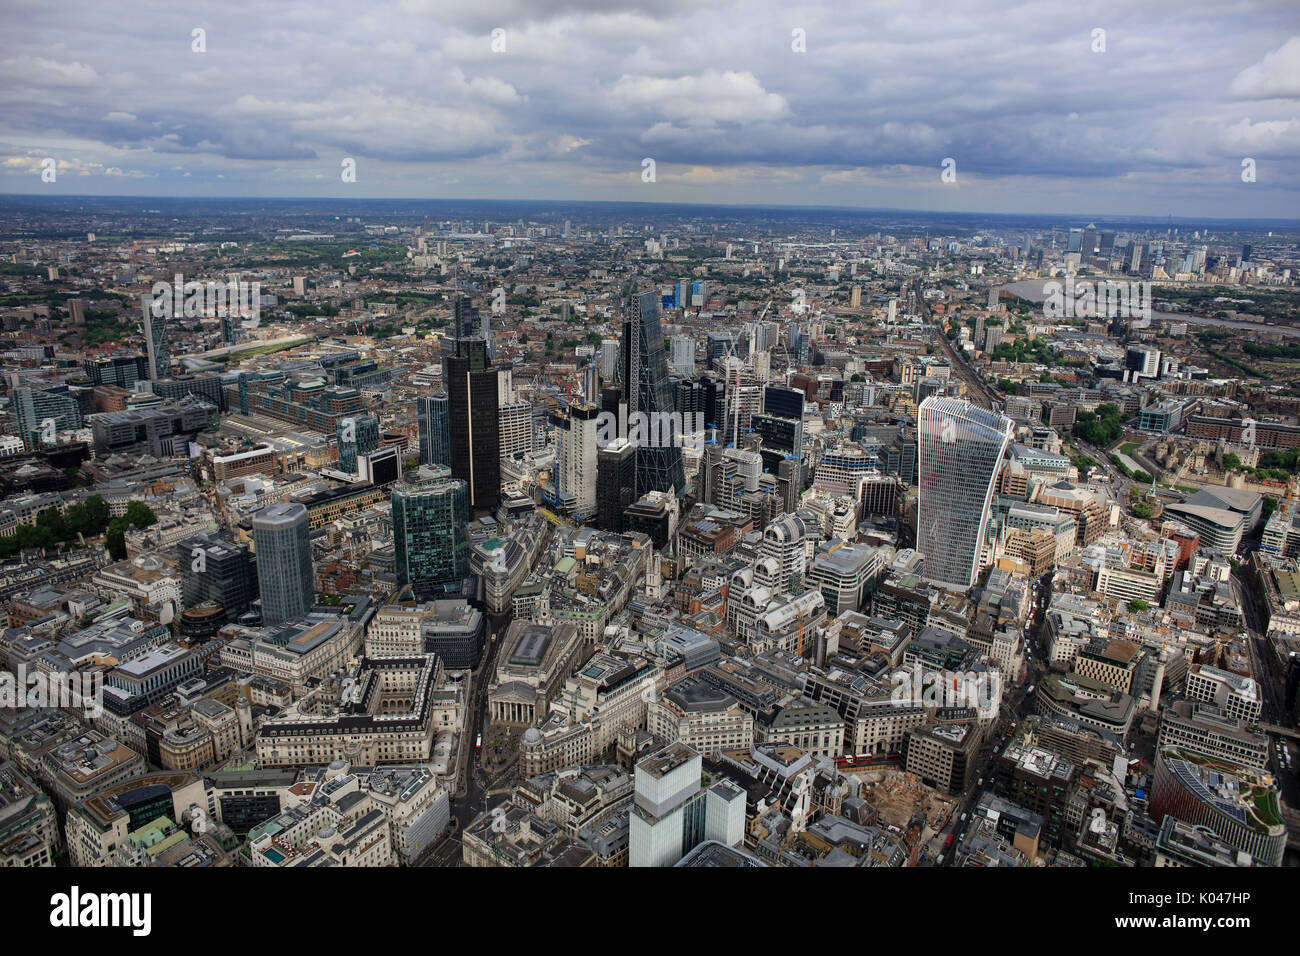 An aerial view of the skyscrapers in the City of London Stock Photo